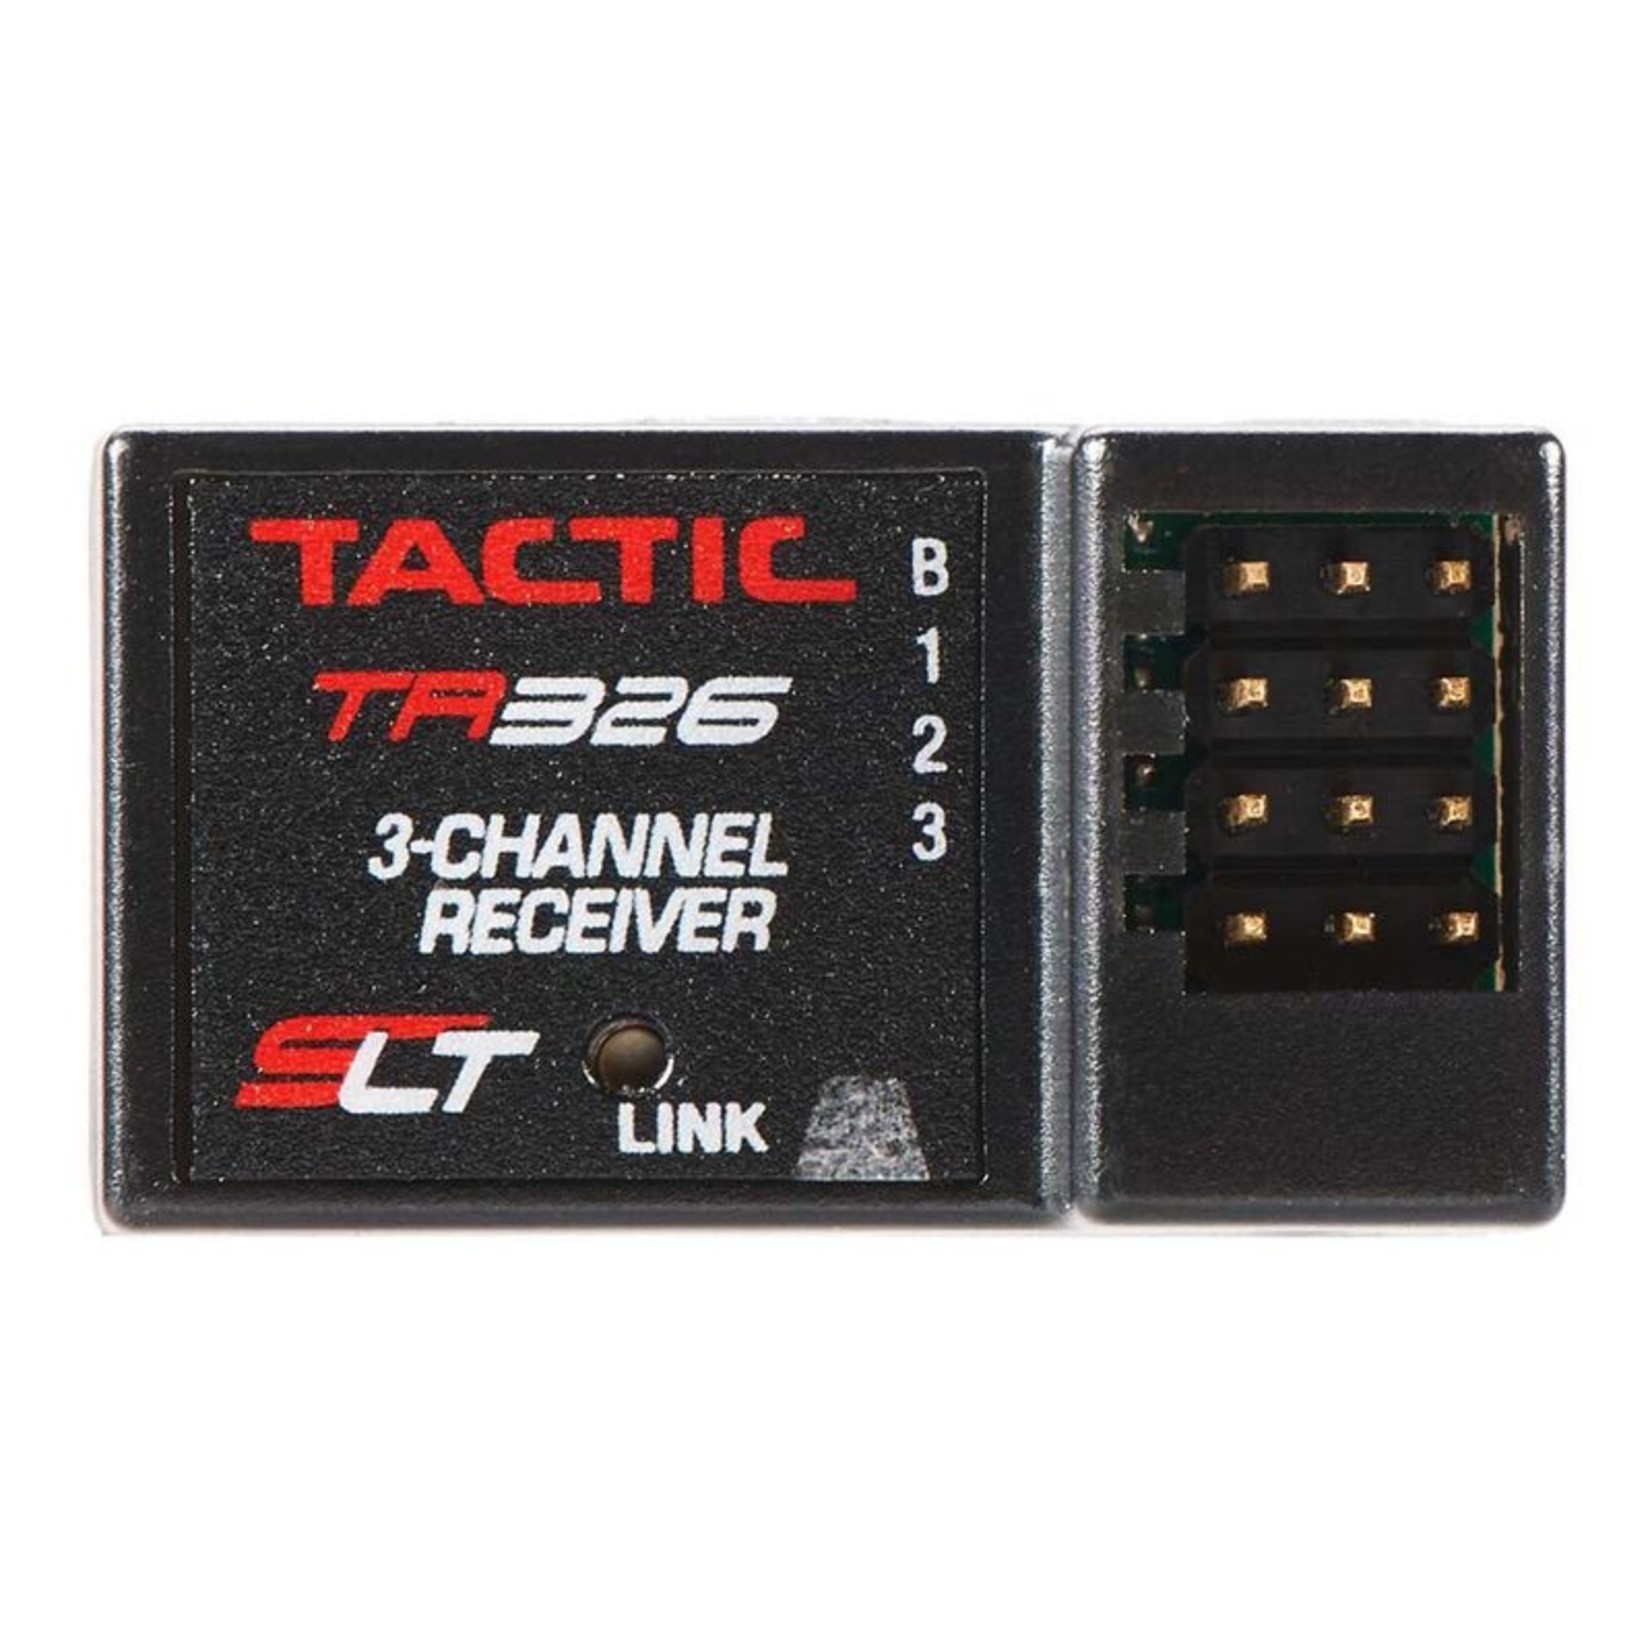 TACTIC TACL0326 TR326 3-Channel SLT HV Receiver Only